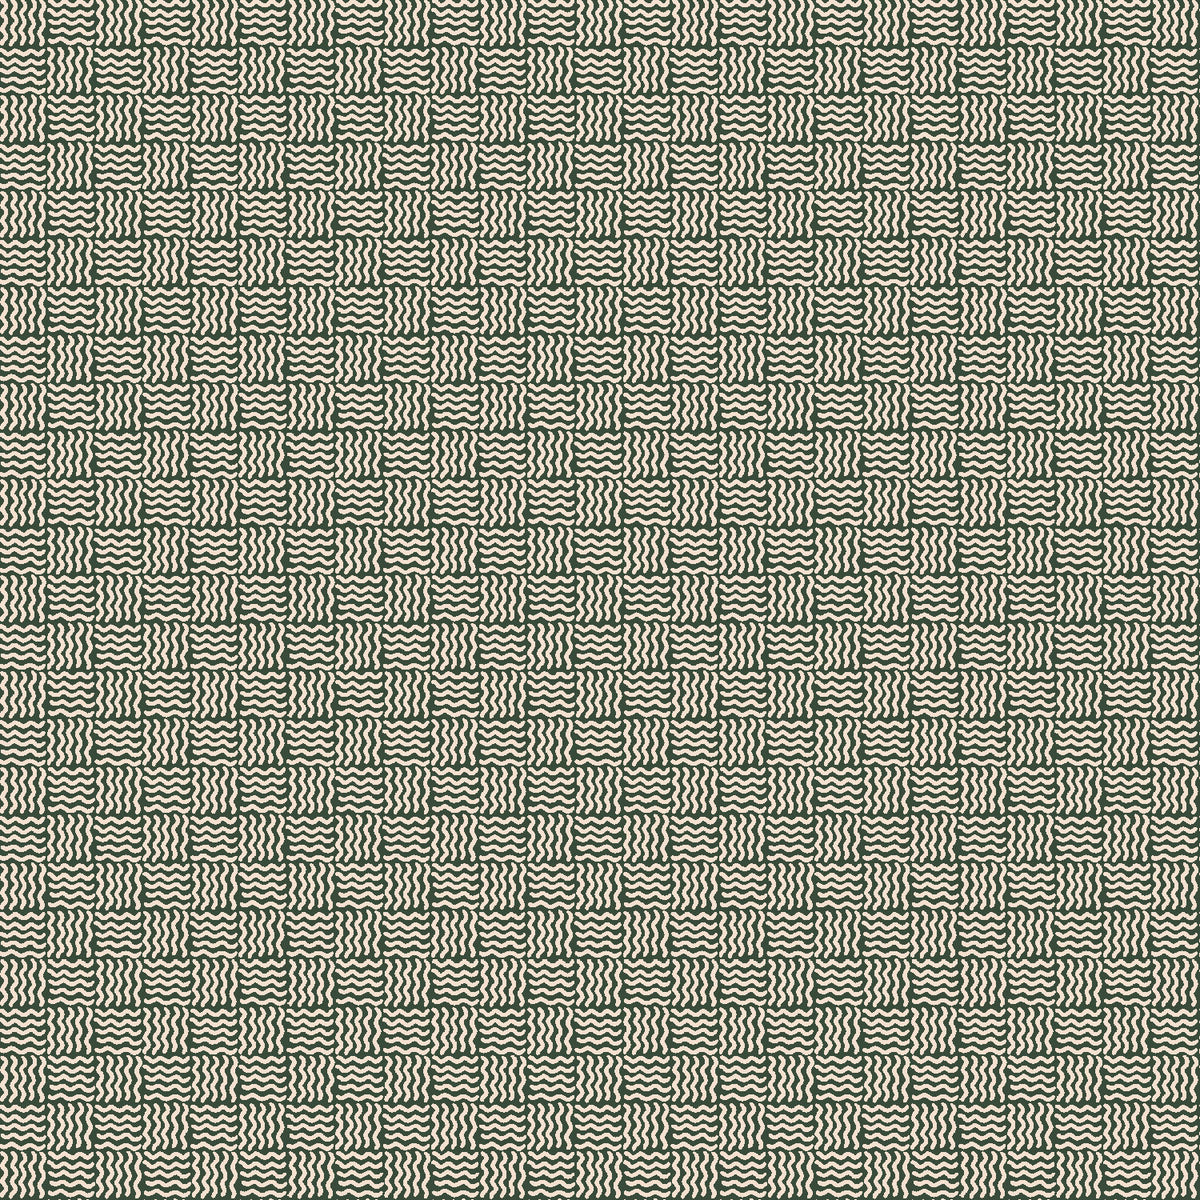 Savanna Quilt Fabric by Cotton+Steel - Weaving Water in Cocoyam Green  - CM205-CO1